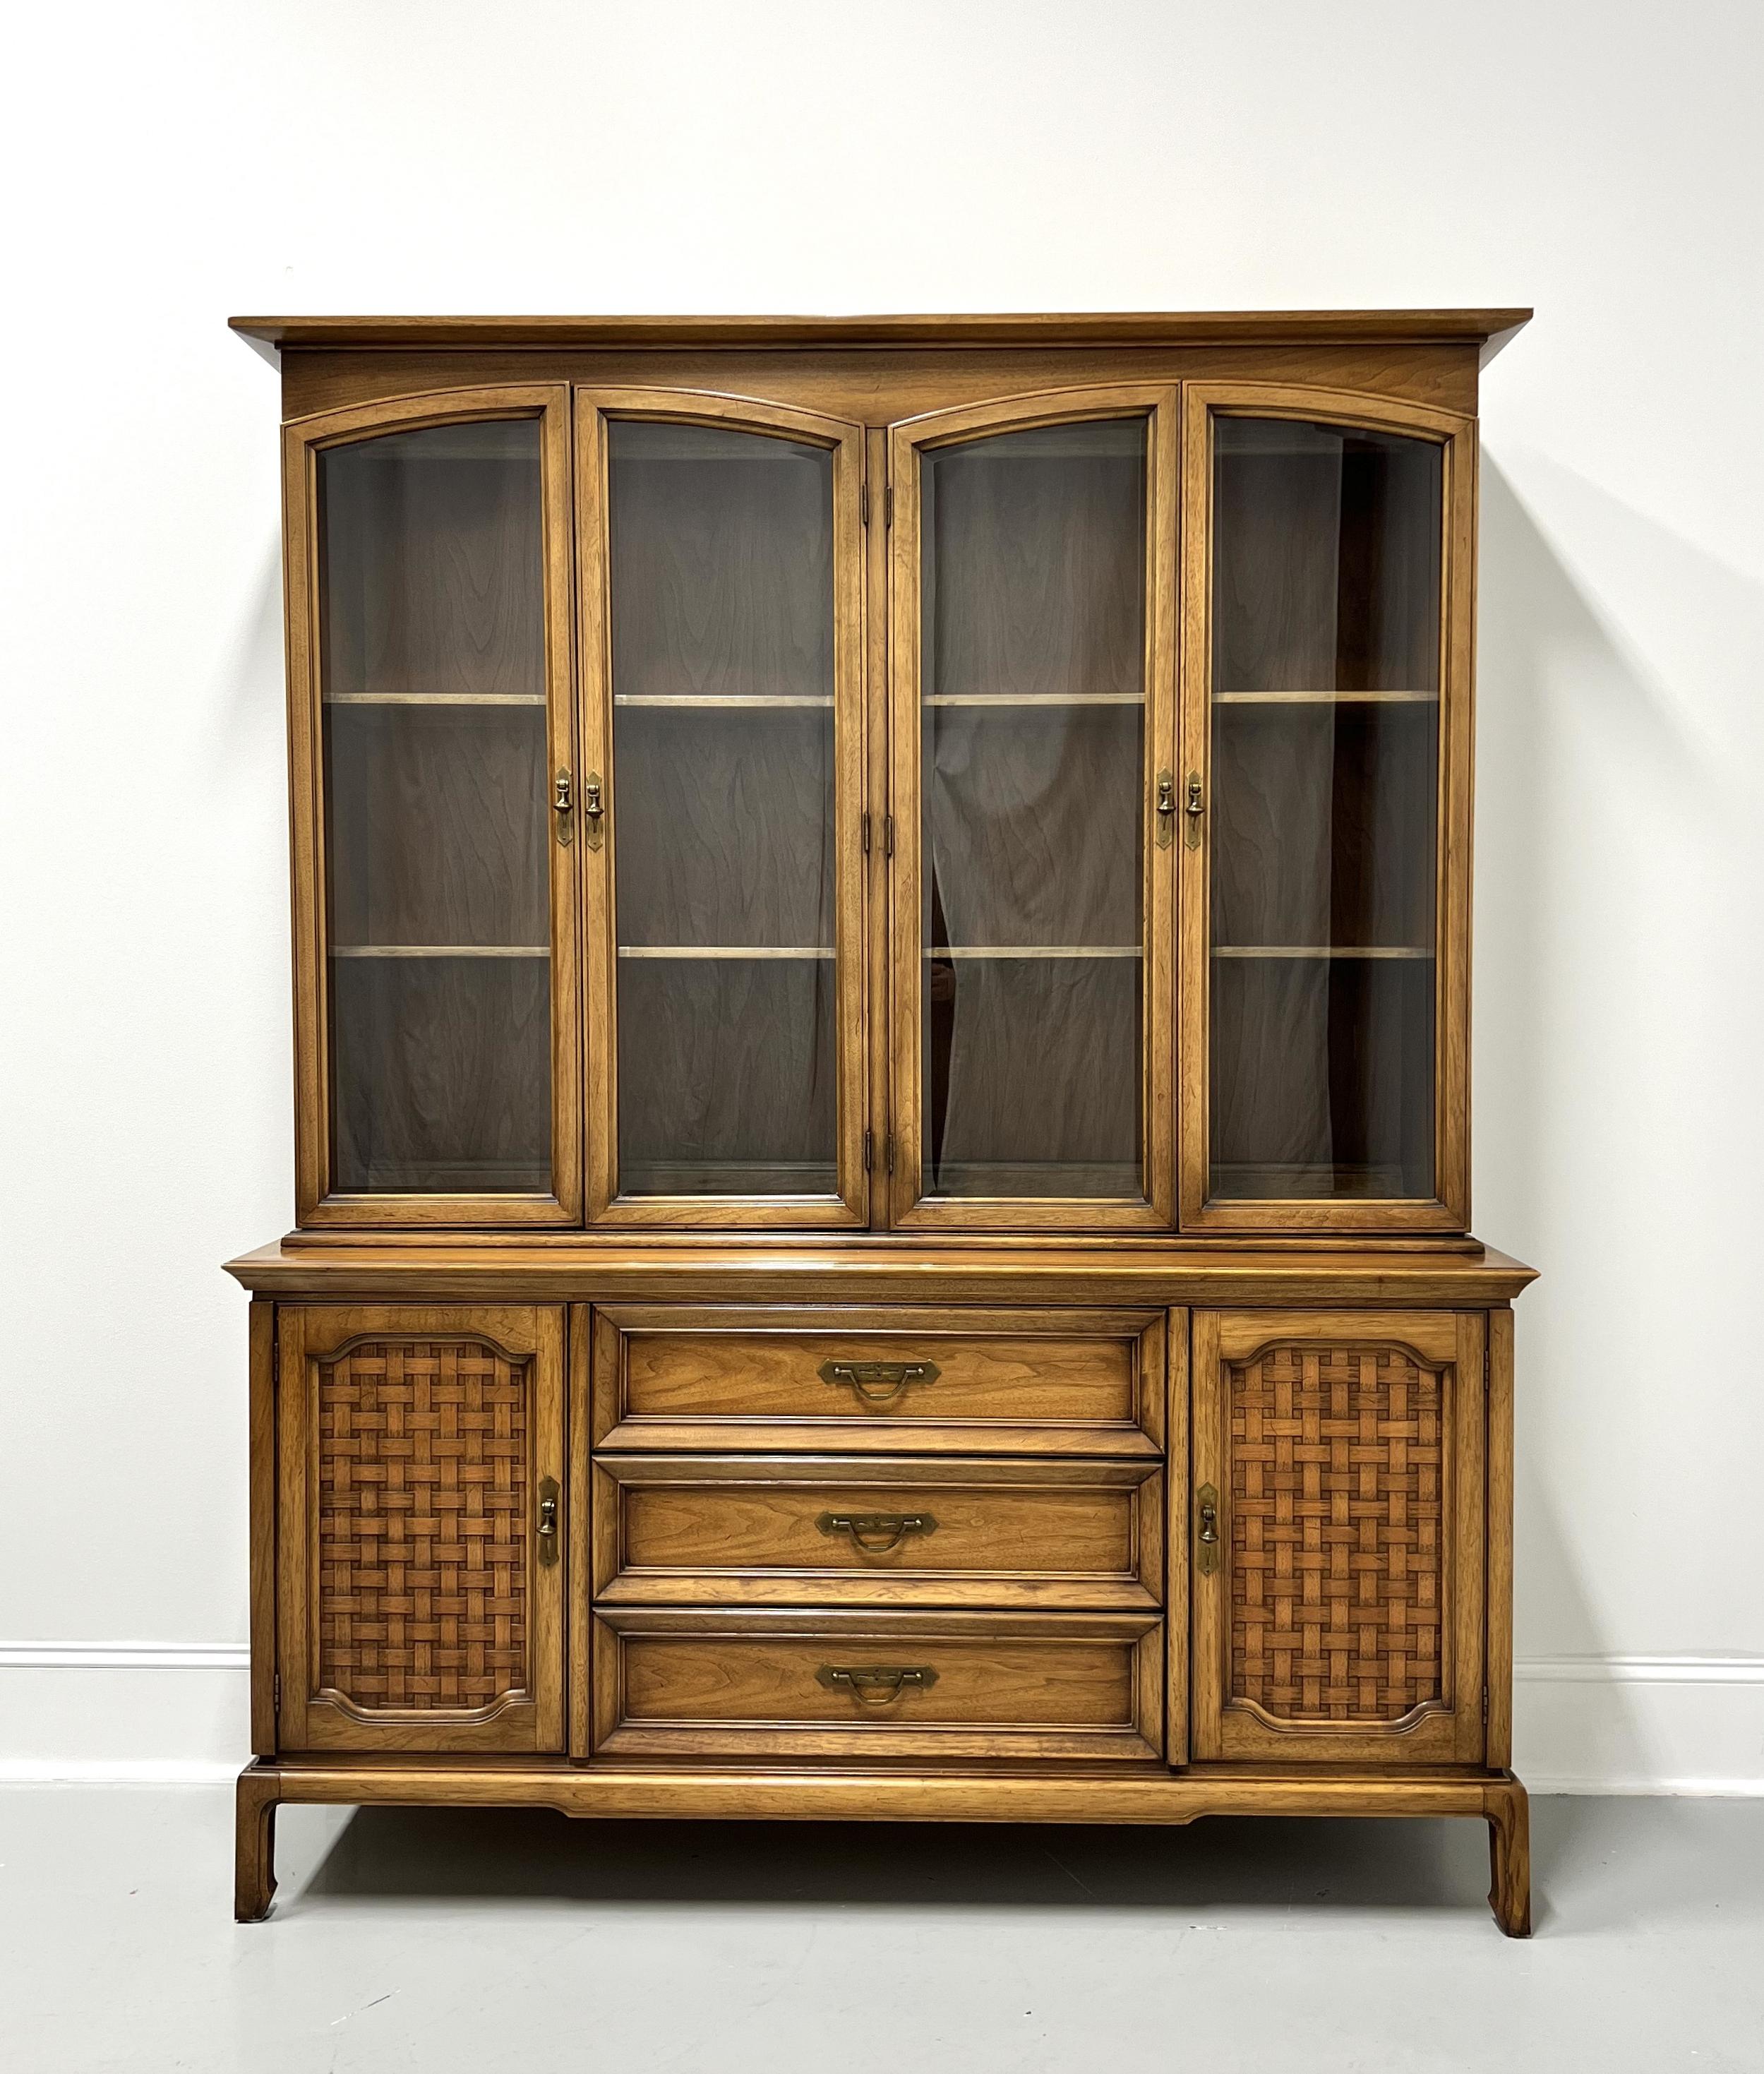 A Mid 20th Century Modern MCM style china cabinet by Thomasville. Pecan, or similar nutwood, with brass hardware, crown molding to top, arched upper cabinet single pane glass doors, ogee edge to top of lower cabinet, raised drawer fronts, basket